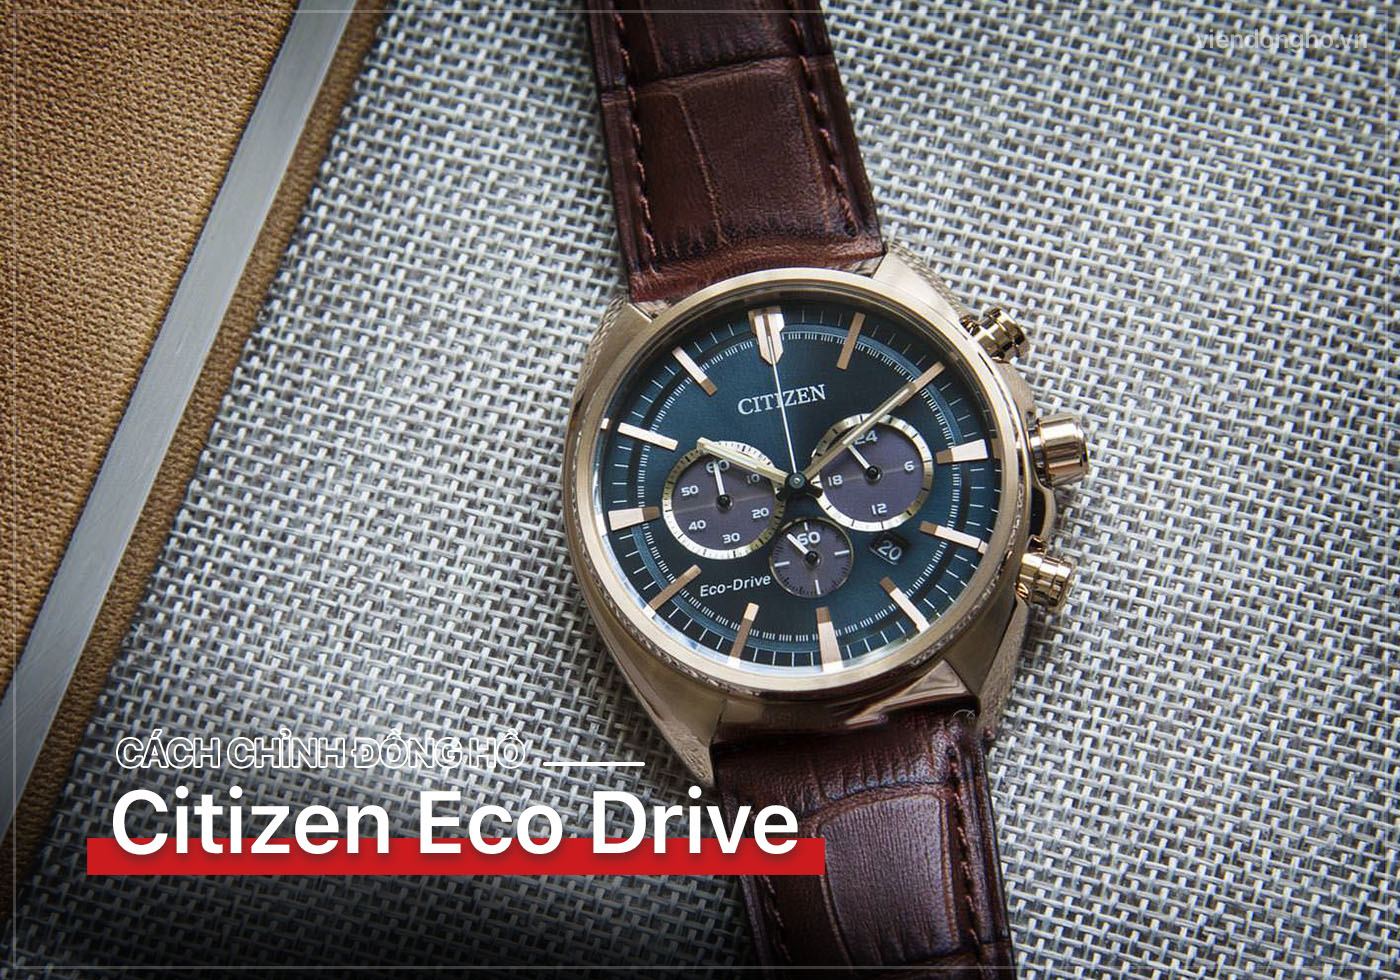 Cach chinh dong ho Citizen Eco Drive - gio, ngay, thang, nam 1